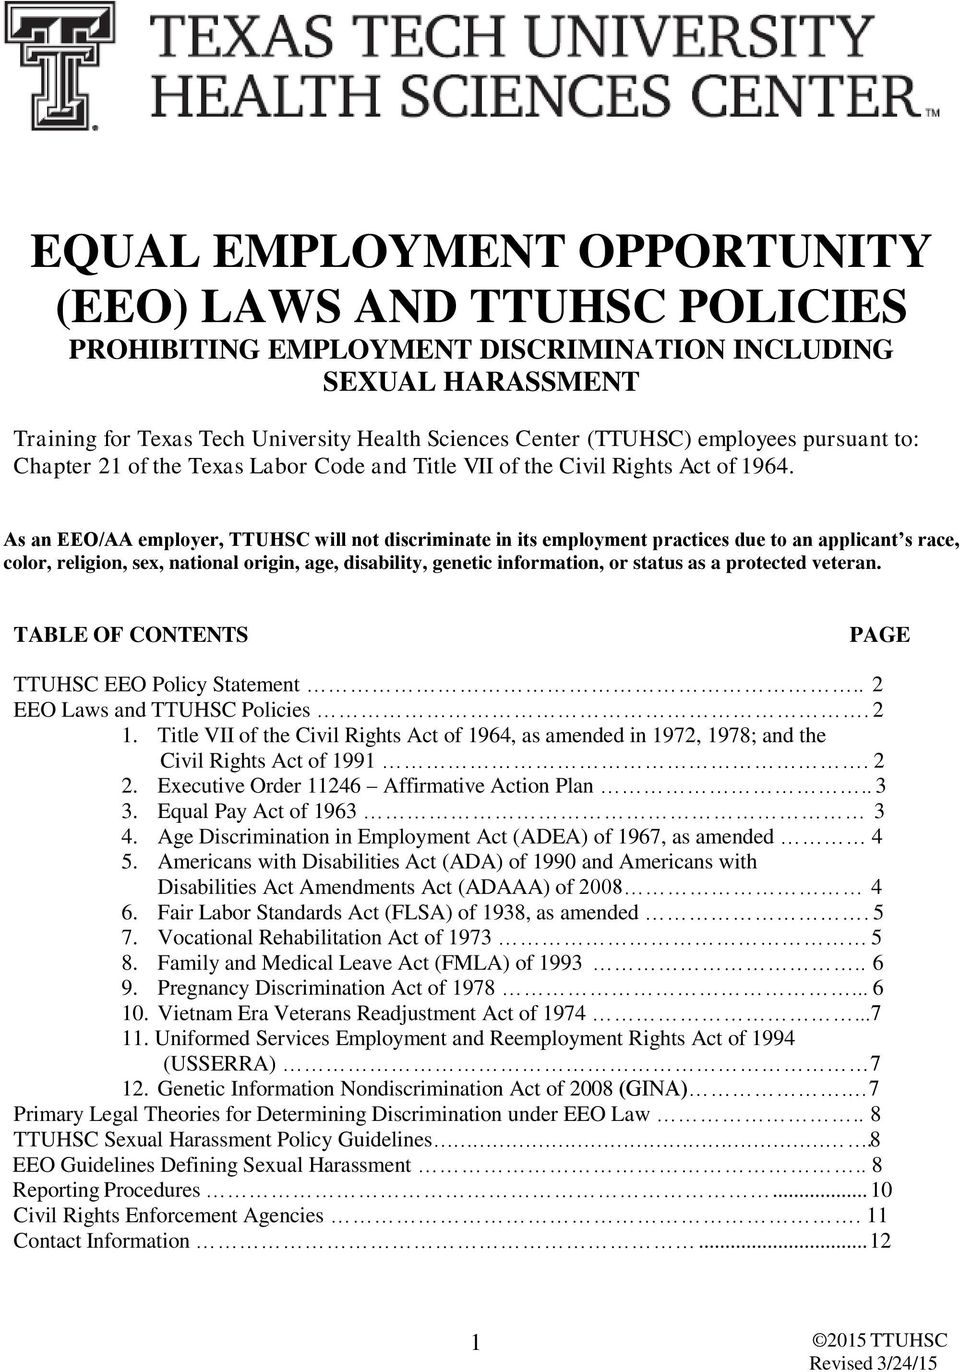 As an EEO/AA employer, TTUHSC will not discriminate in its employment practices due to an applicant s race, color, religion, sex, national origin, age, disability, genetic information, or status as a